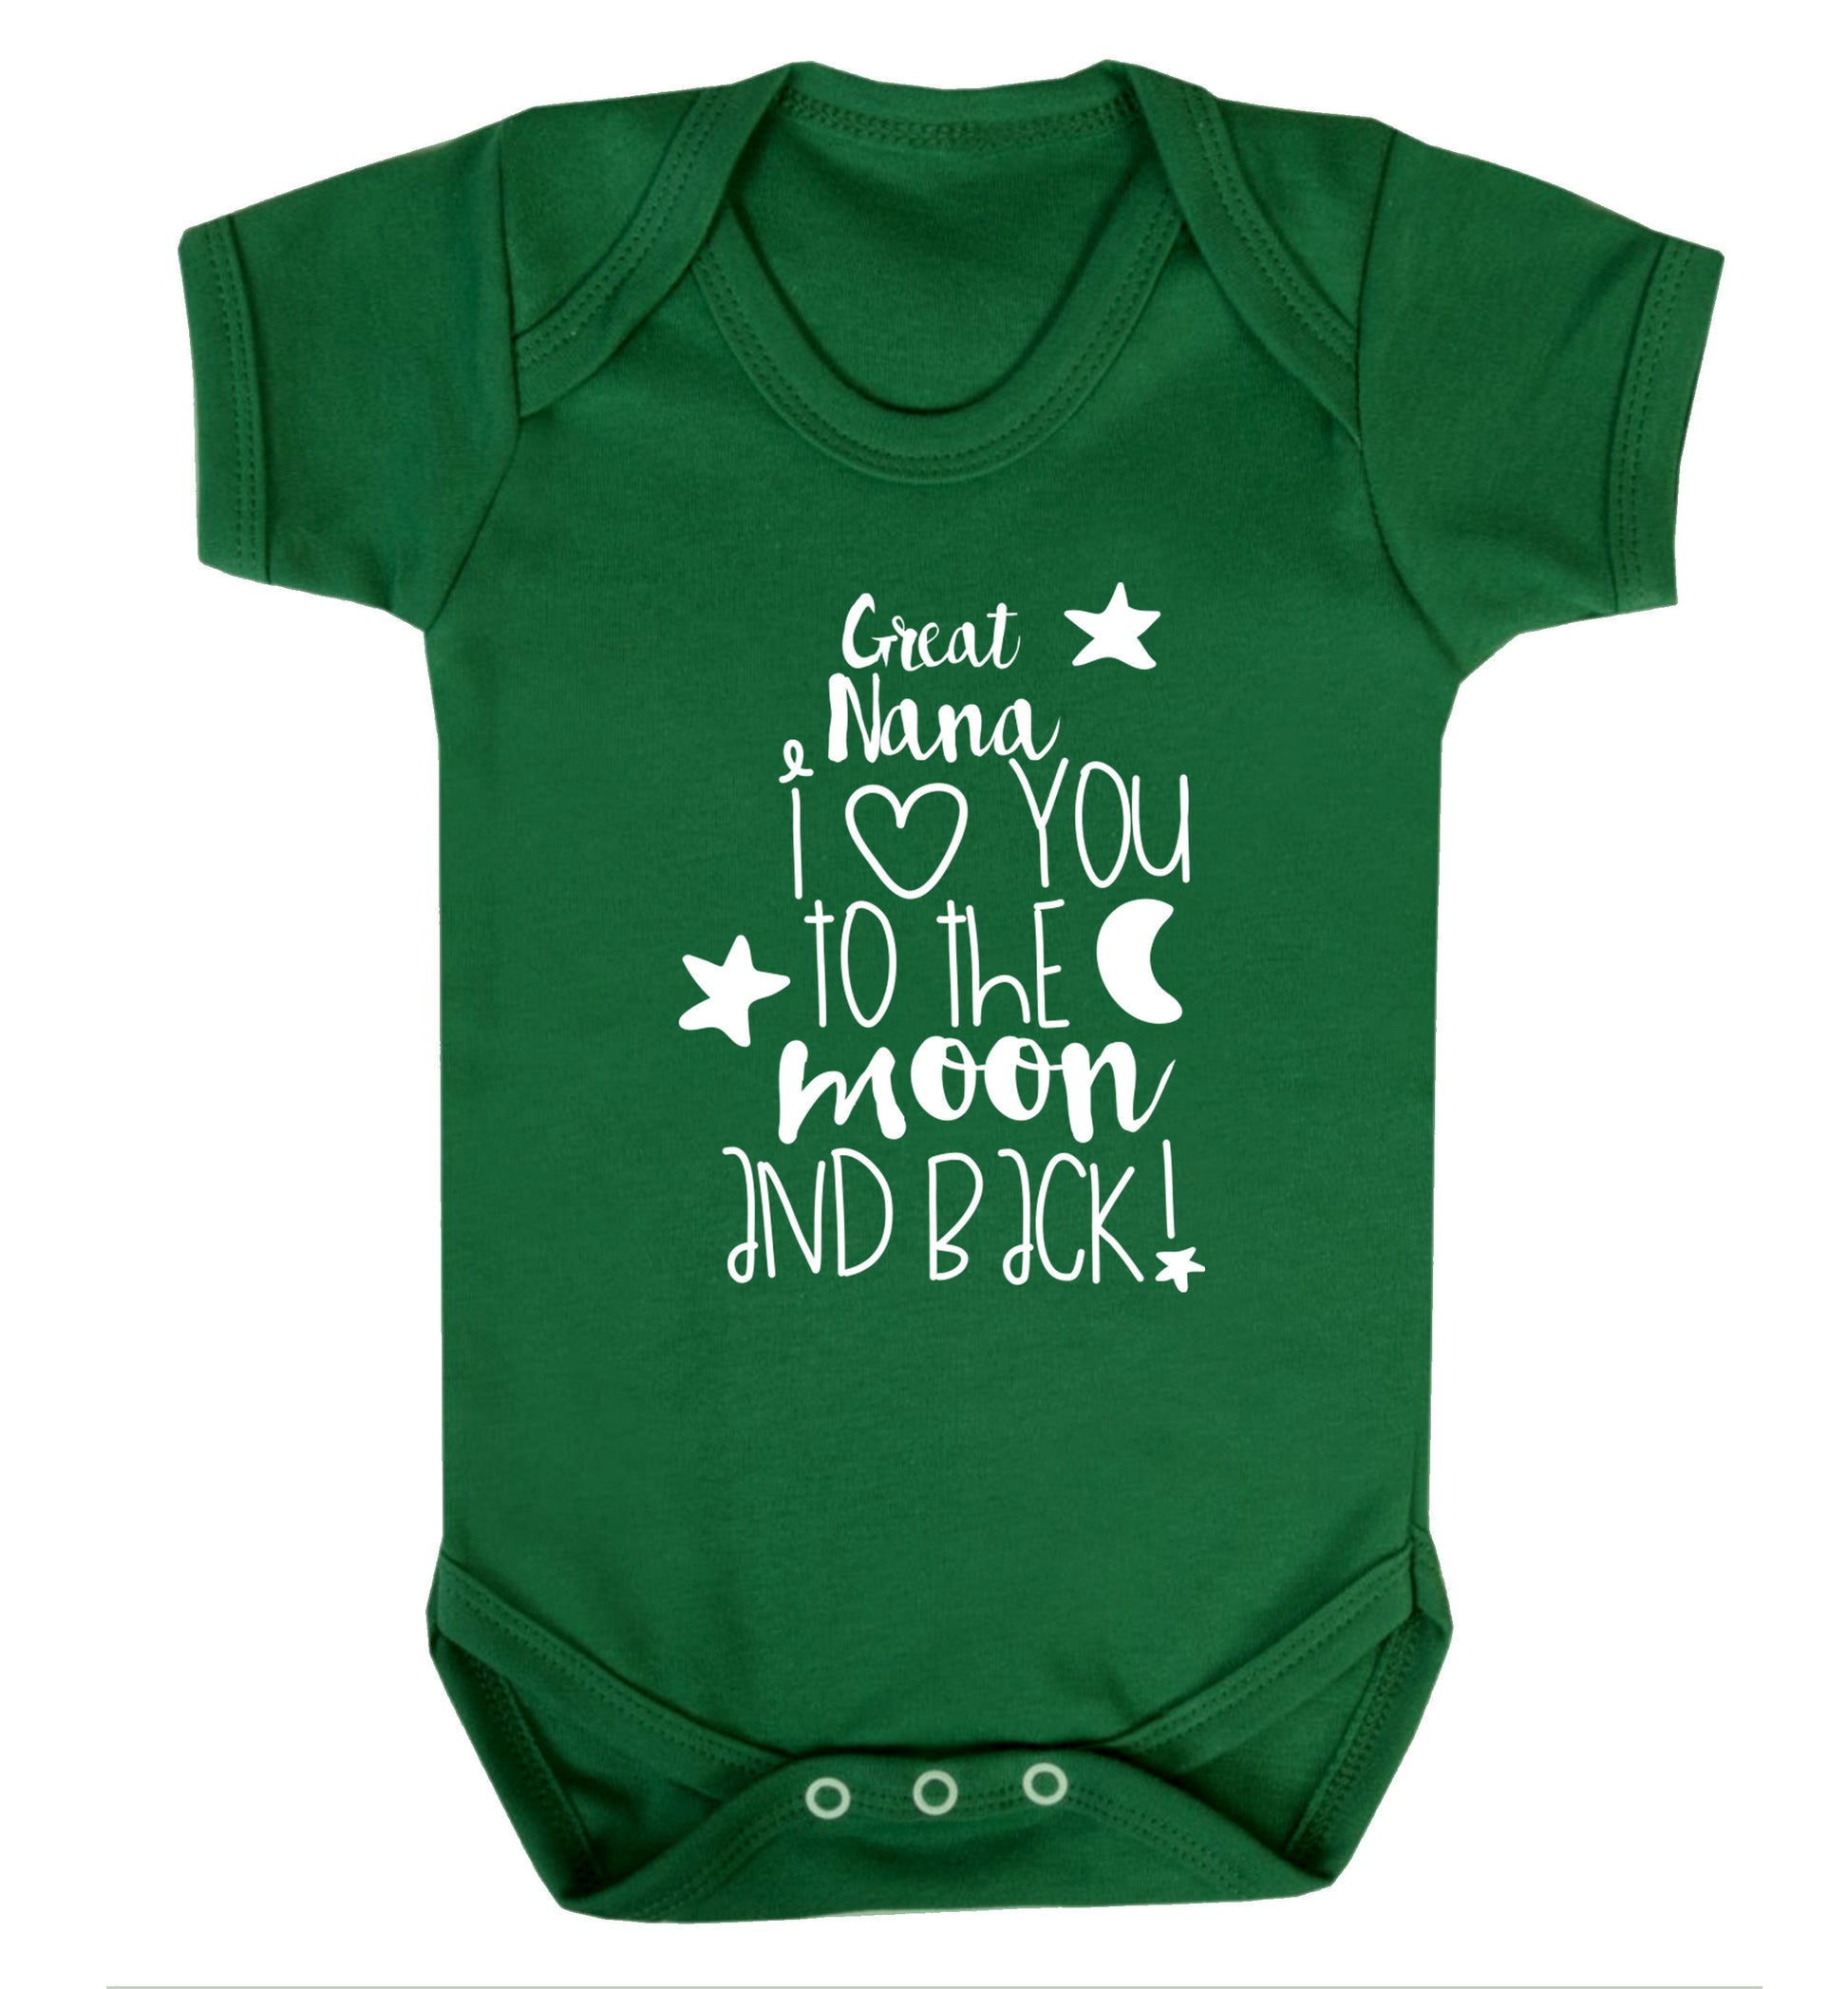 Great Nana I love you to the moon and back Baby Vest green 18-24 months